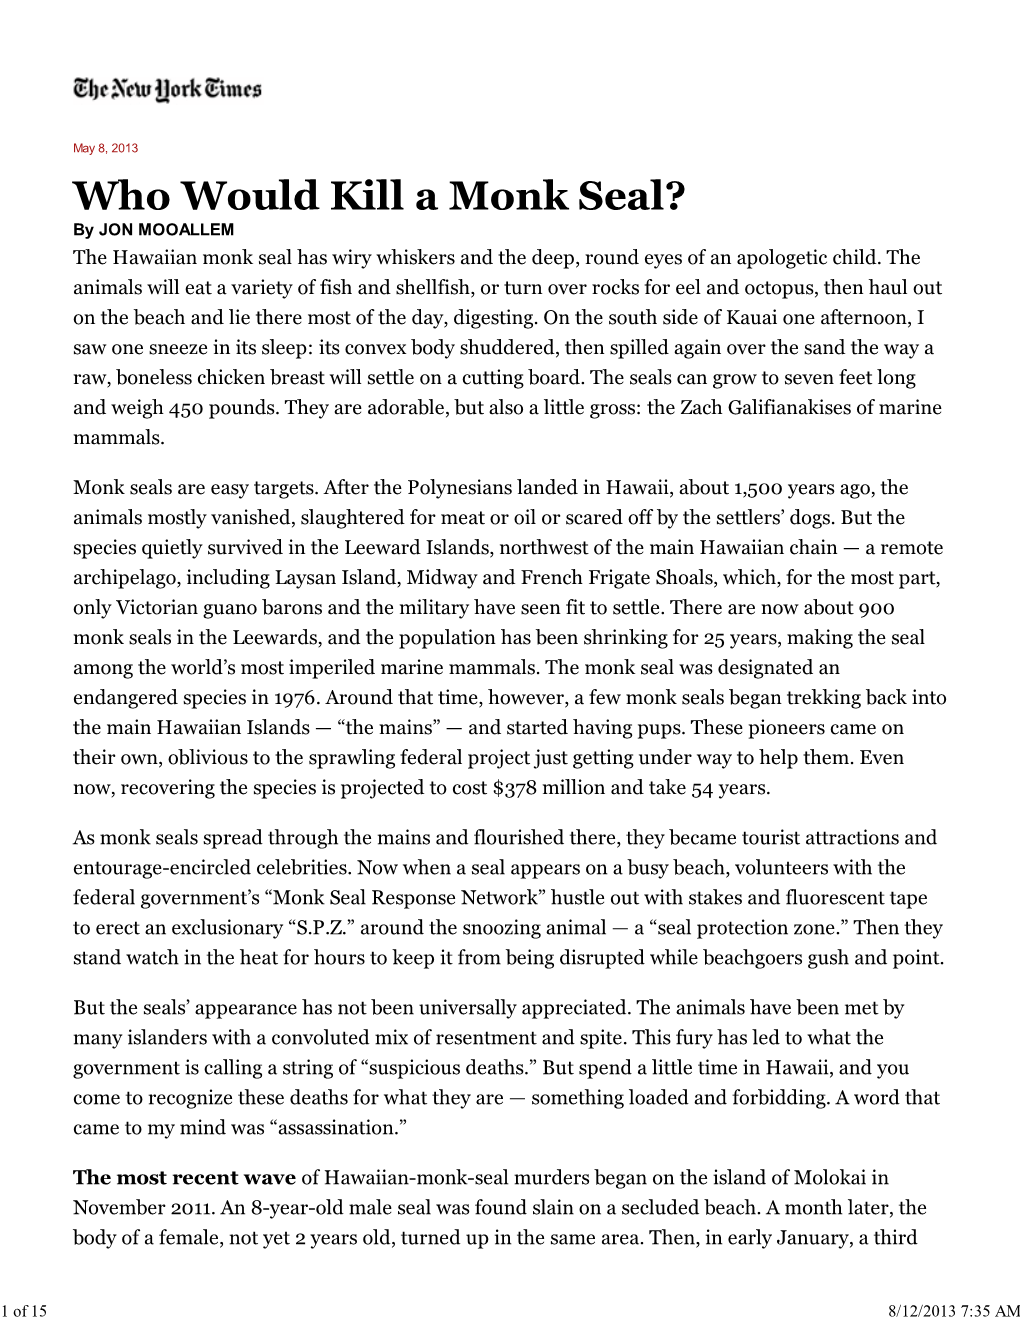 Who Would Kill a Monk Seal? - Nytimes.Com